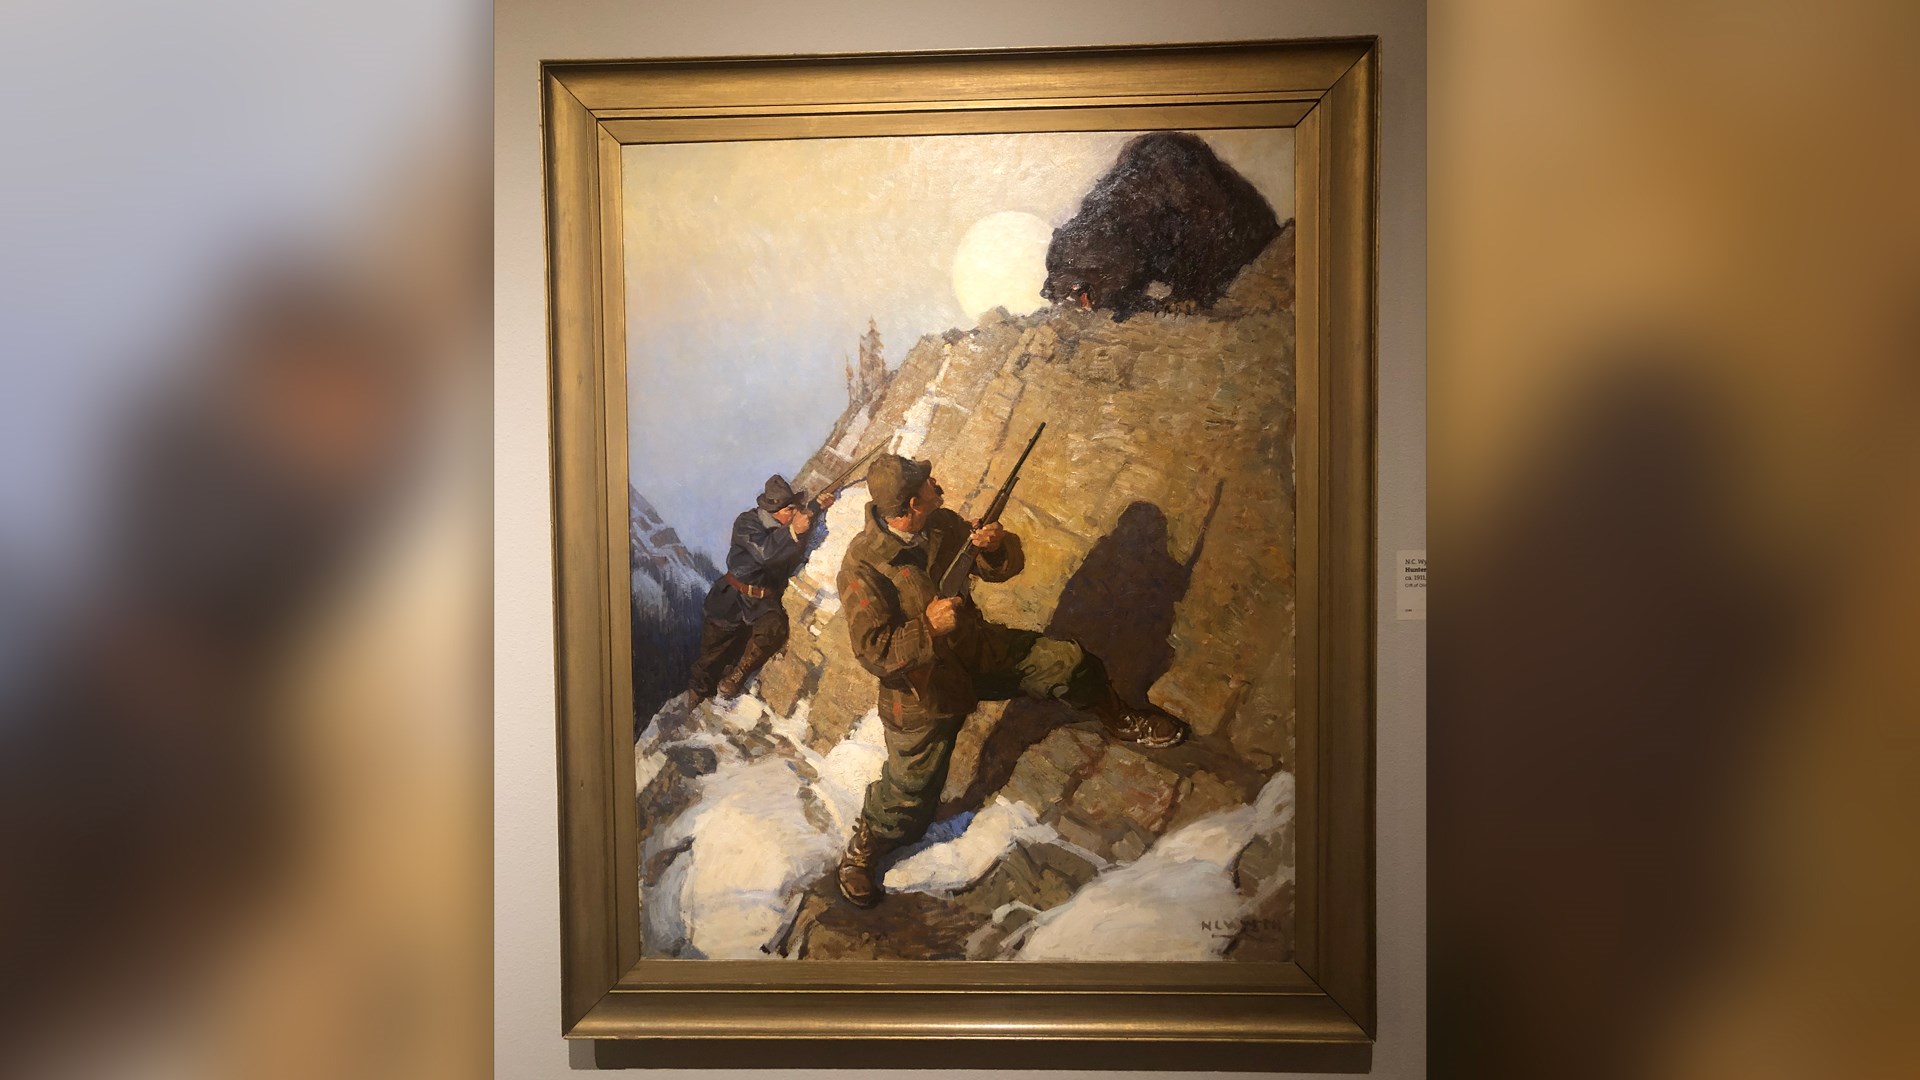 painting on wall in cody firearms museum of hunters facing grizzly bear on mountain rocks snow